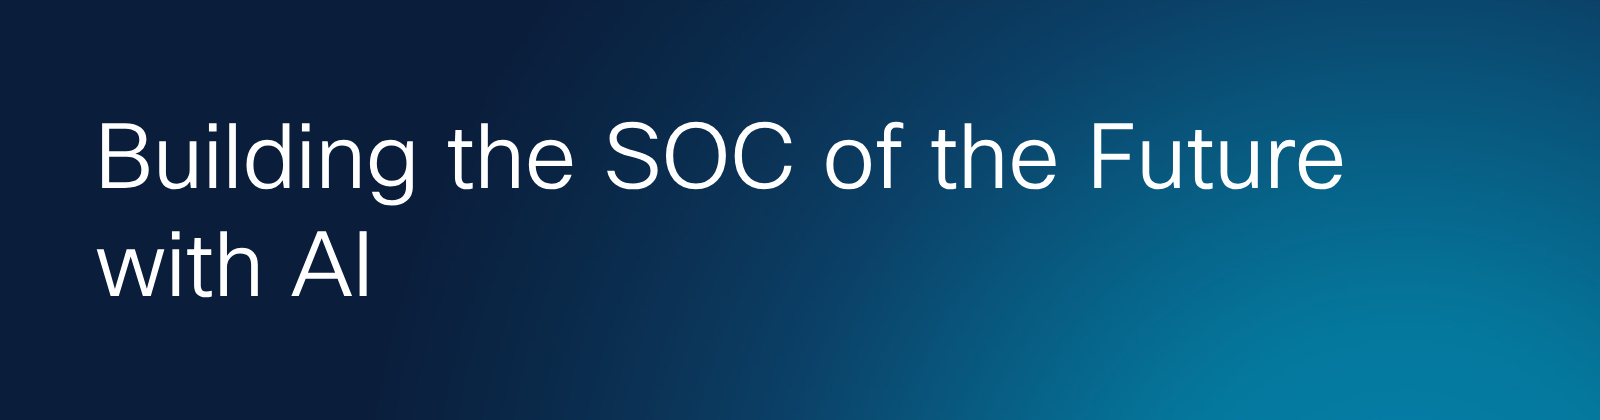 Text Building the SOC of the future with AI